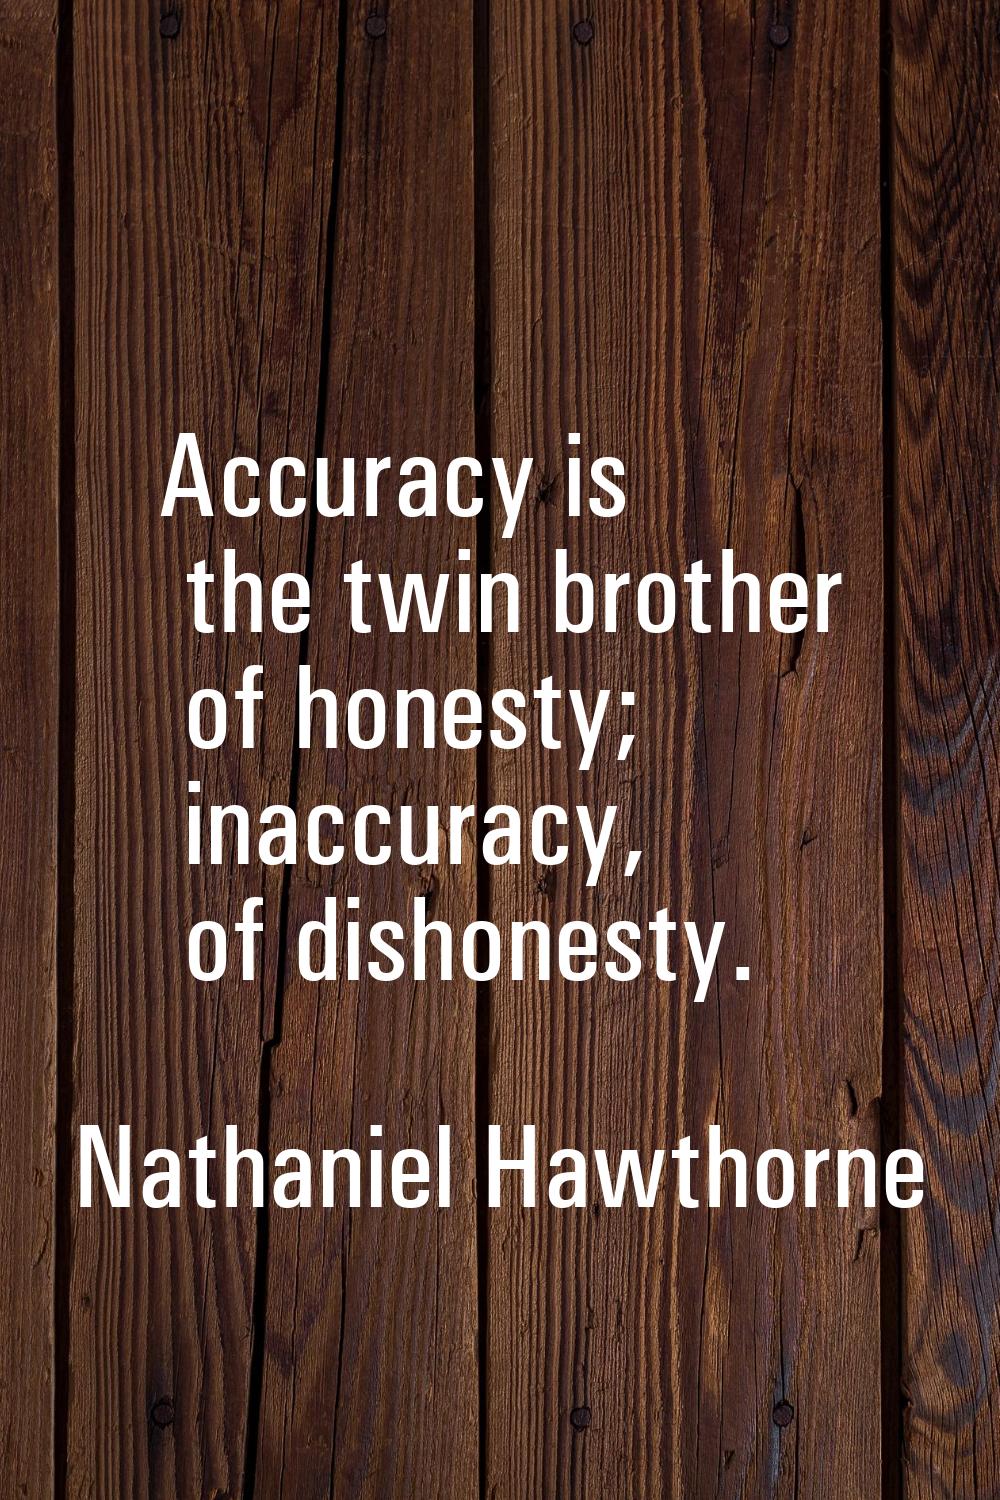 Accuracy is the twin brother of honesty; inaccuracy, of dishonesty.